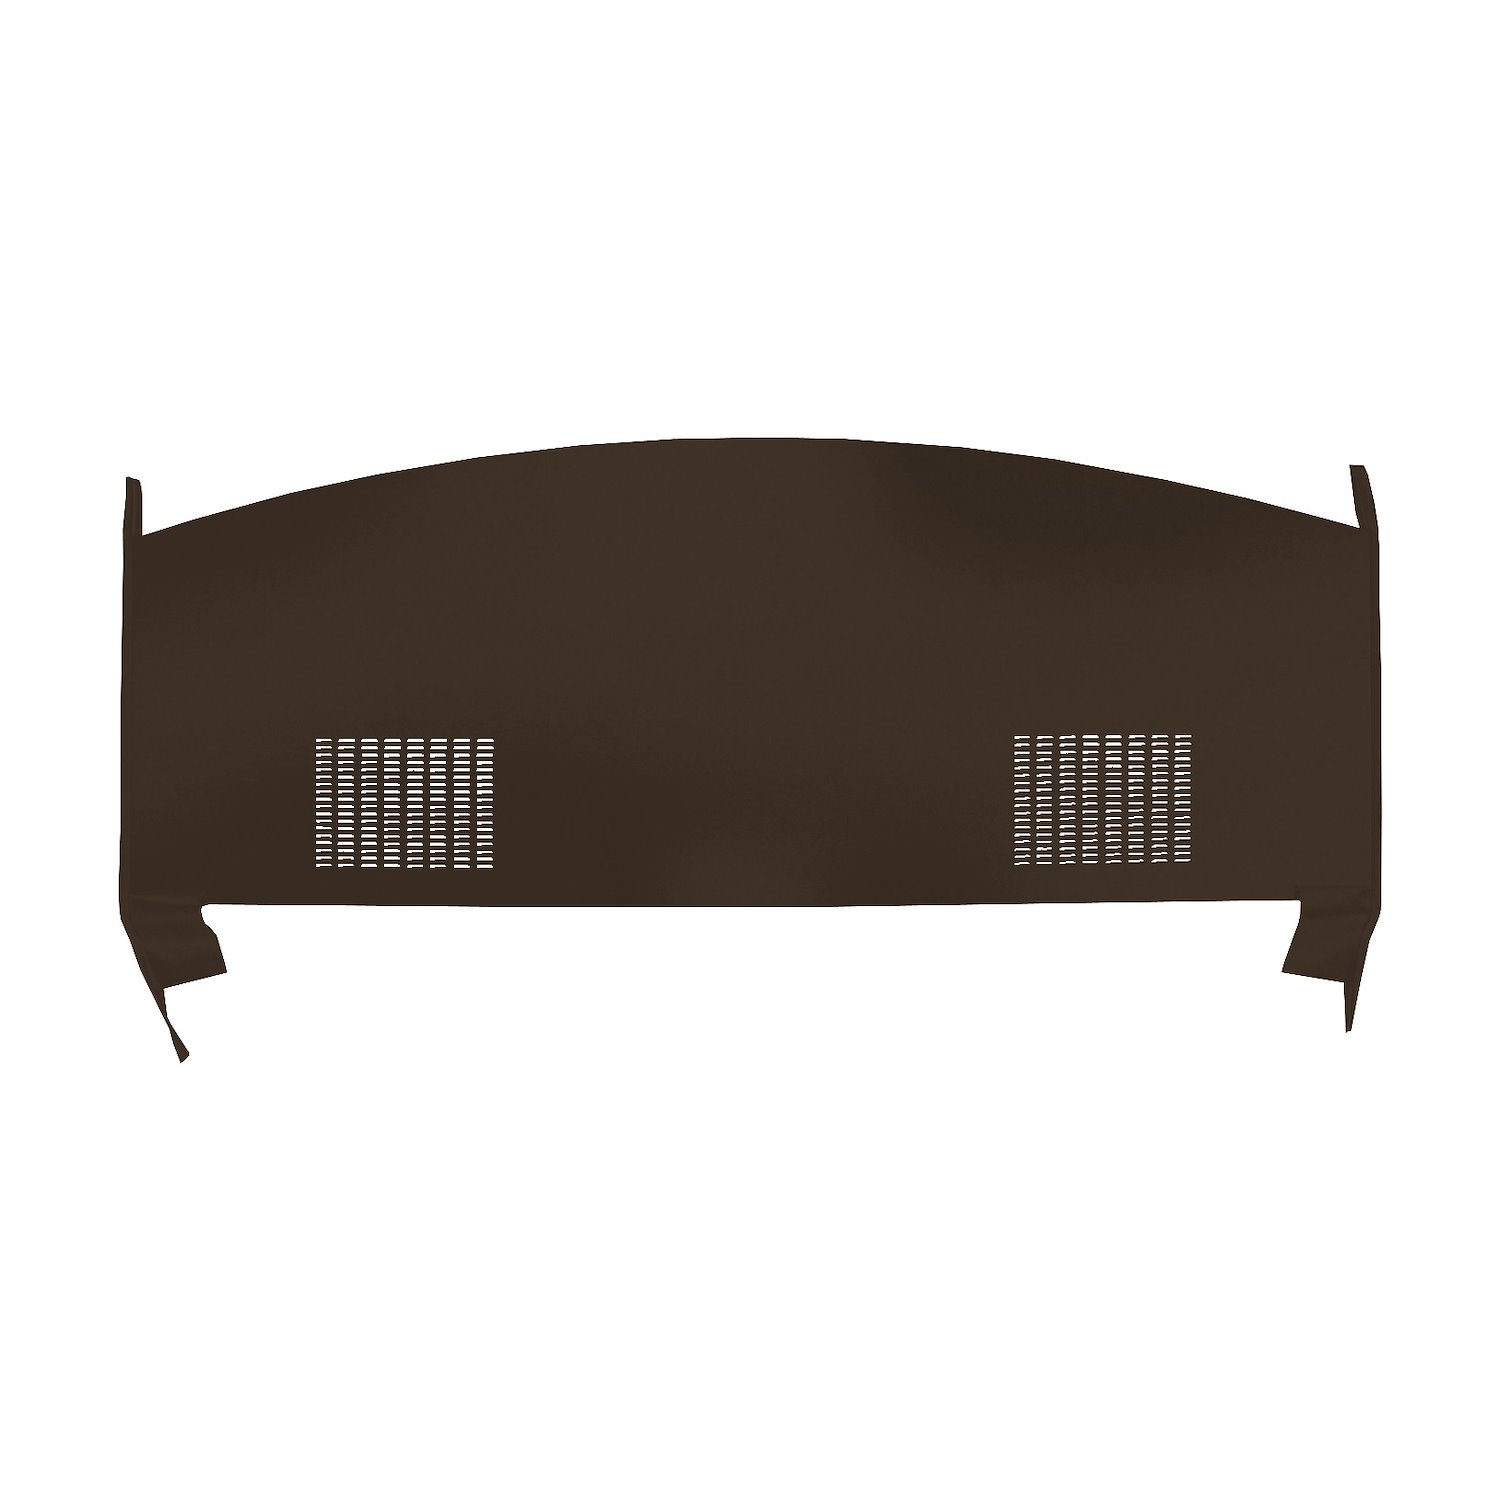 PT70CLV664 71 DUSTER/DEMON PACKAGE TRAY WITH SPEAKER CUTS - BROWN